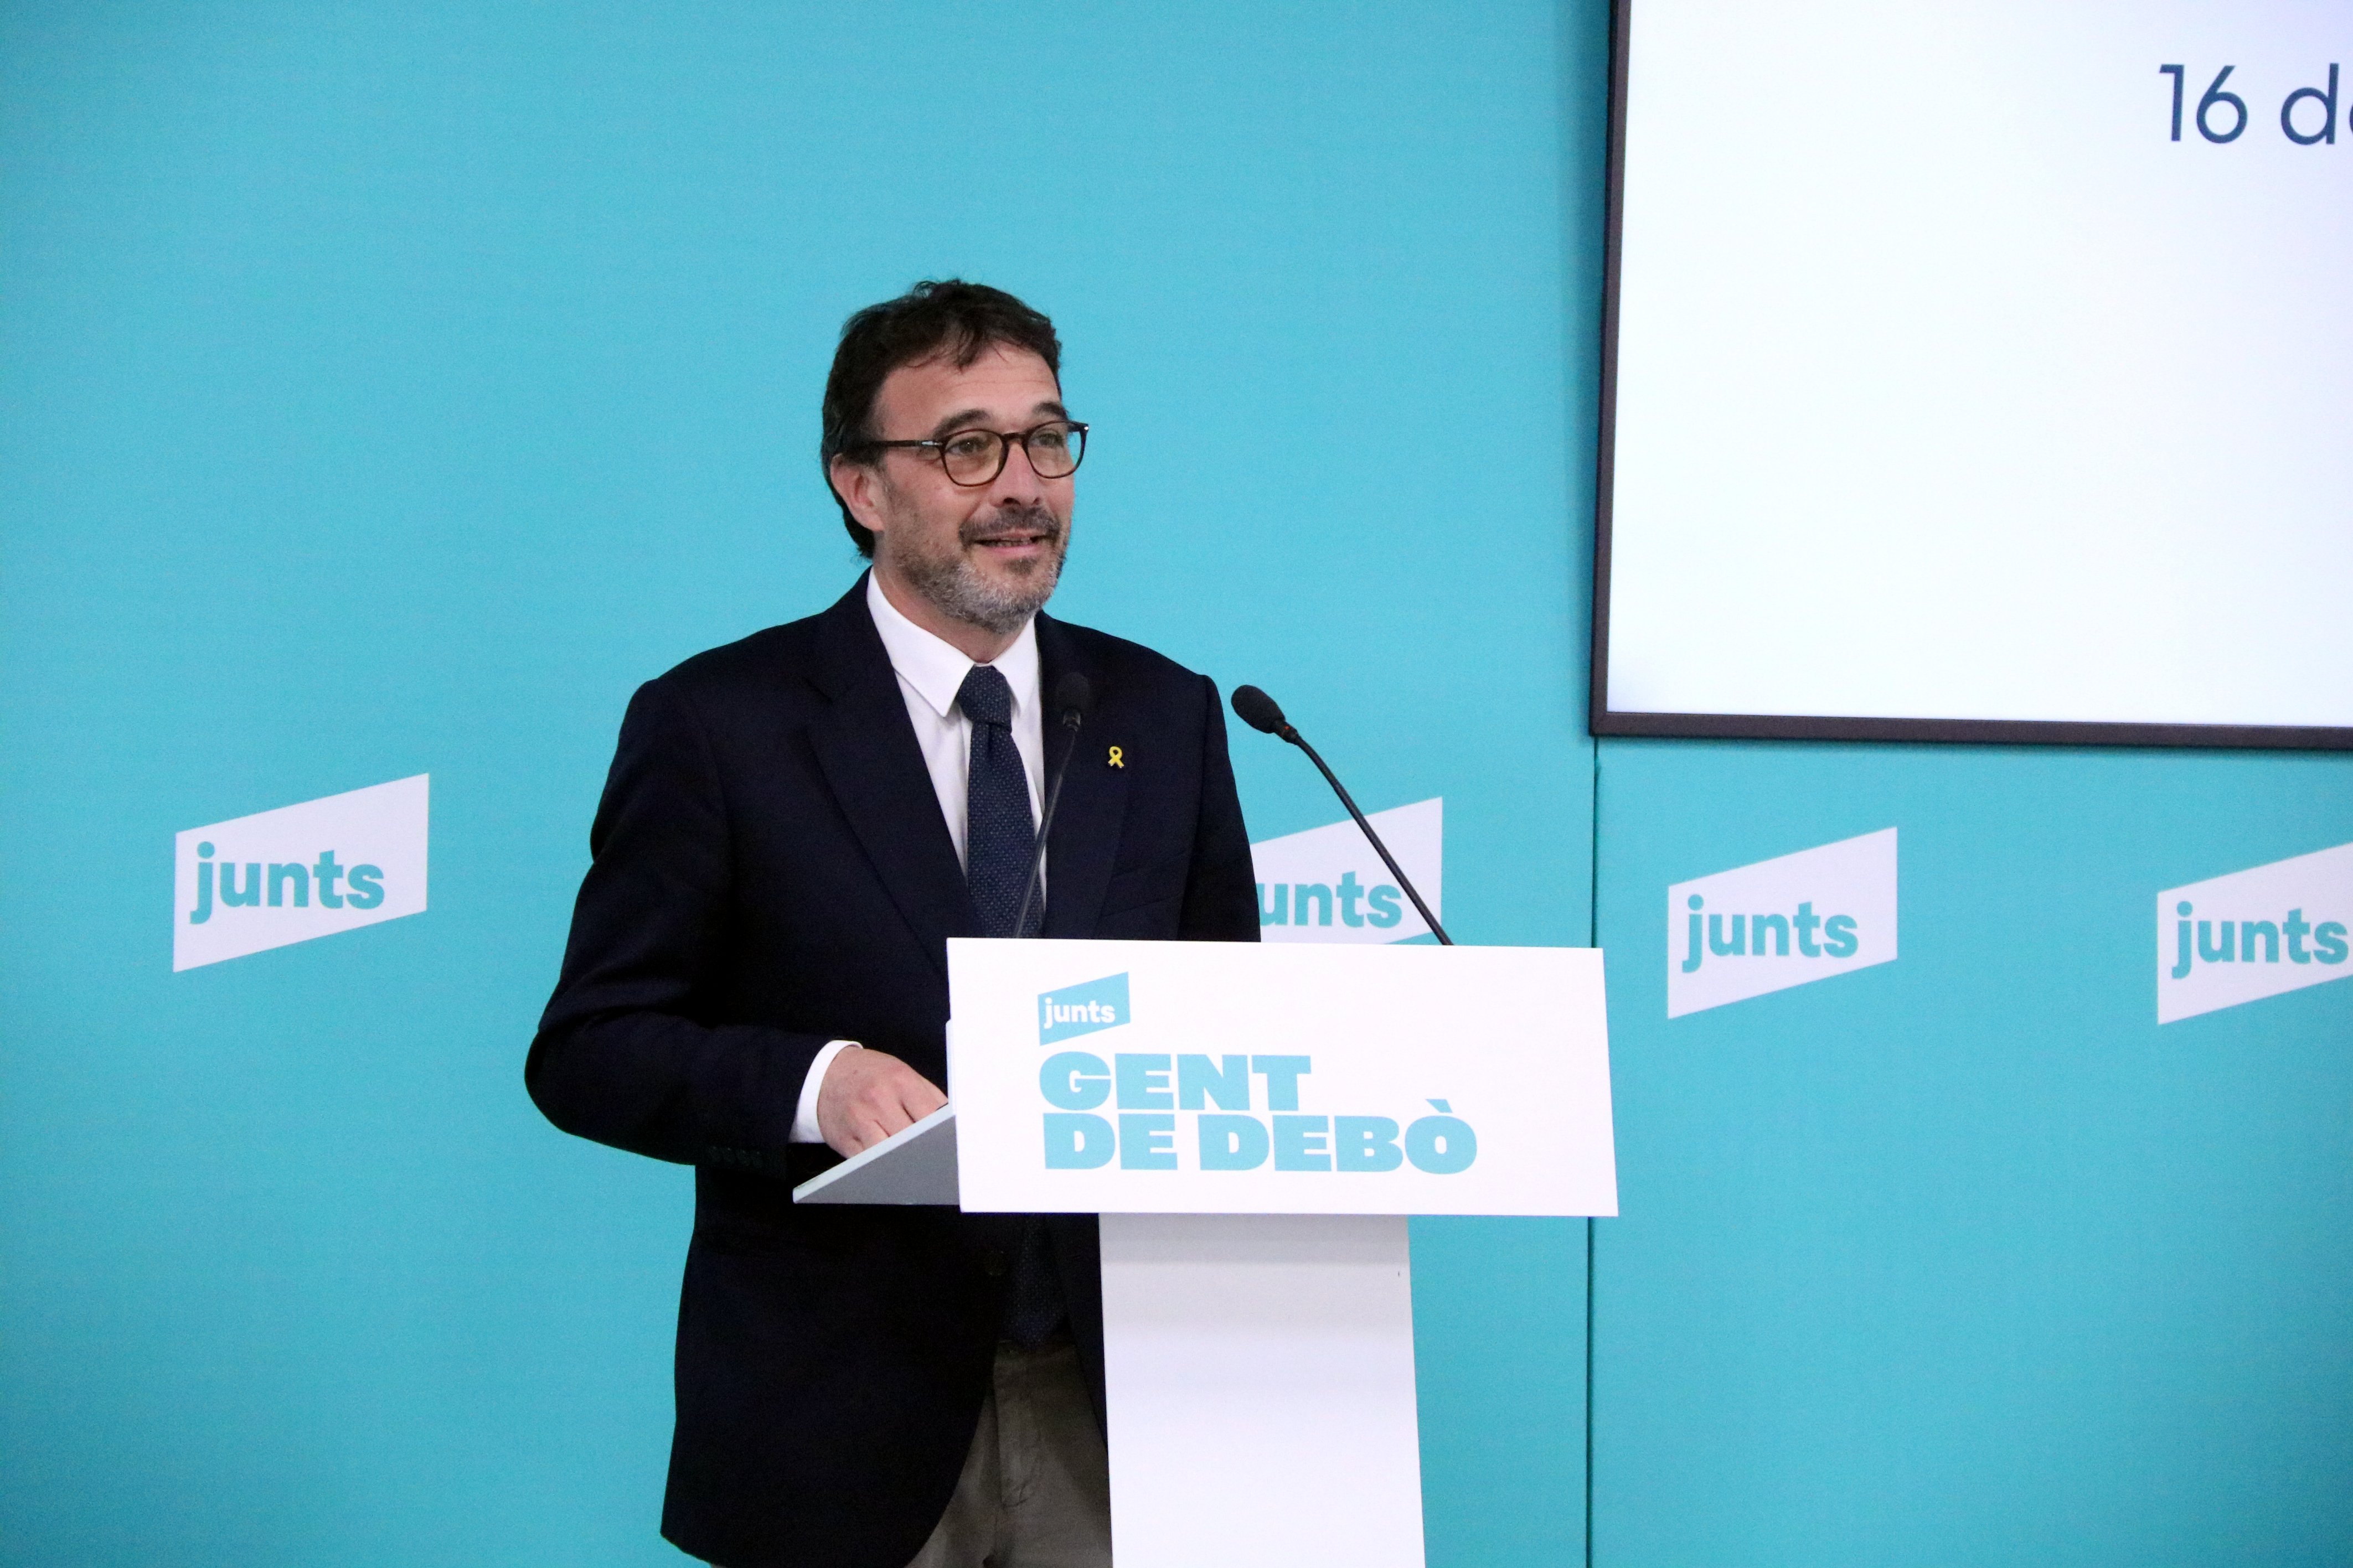 Junts calls on Aragonès not to "falsify" Catalan reality at Spanish-French summit